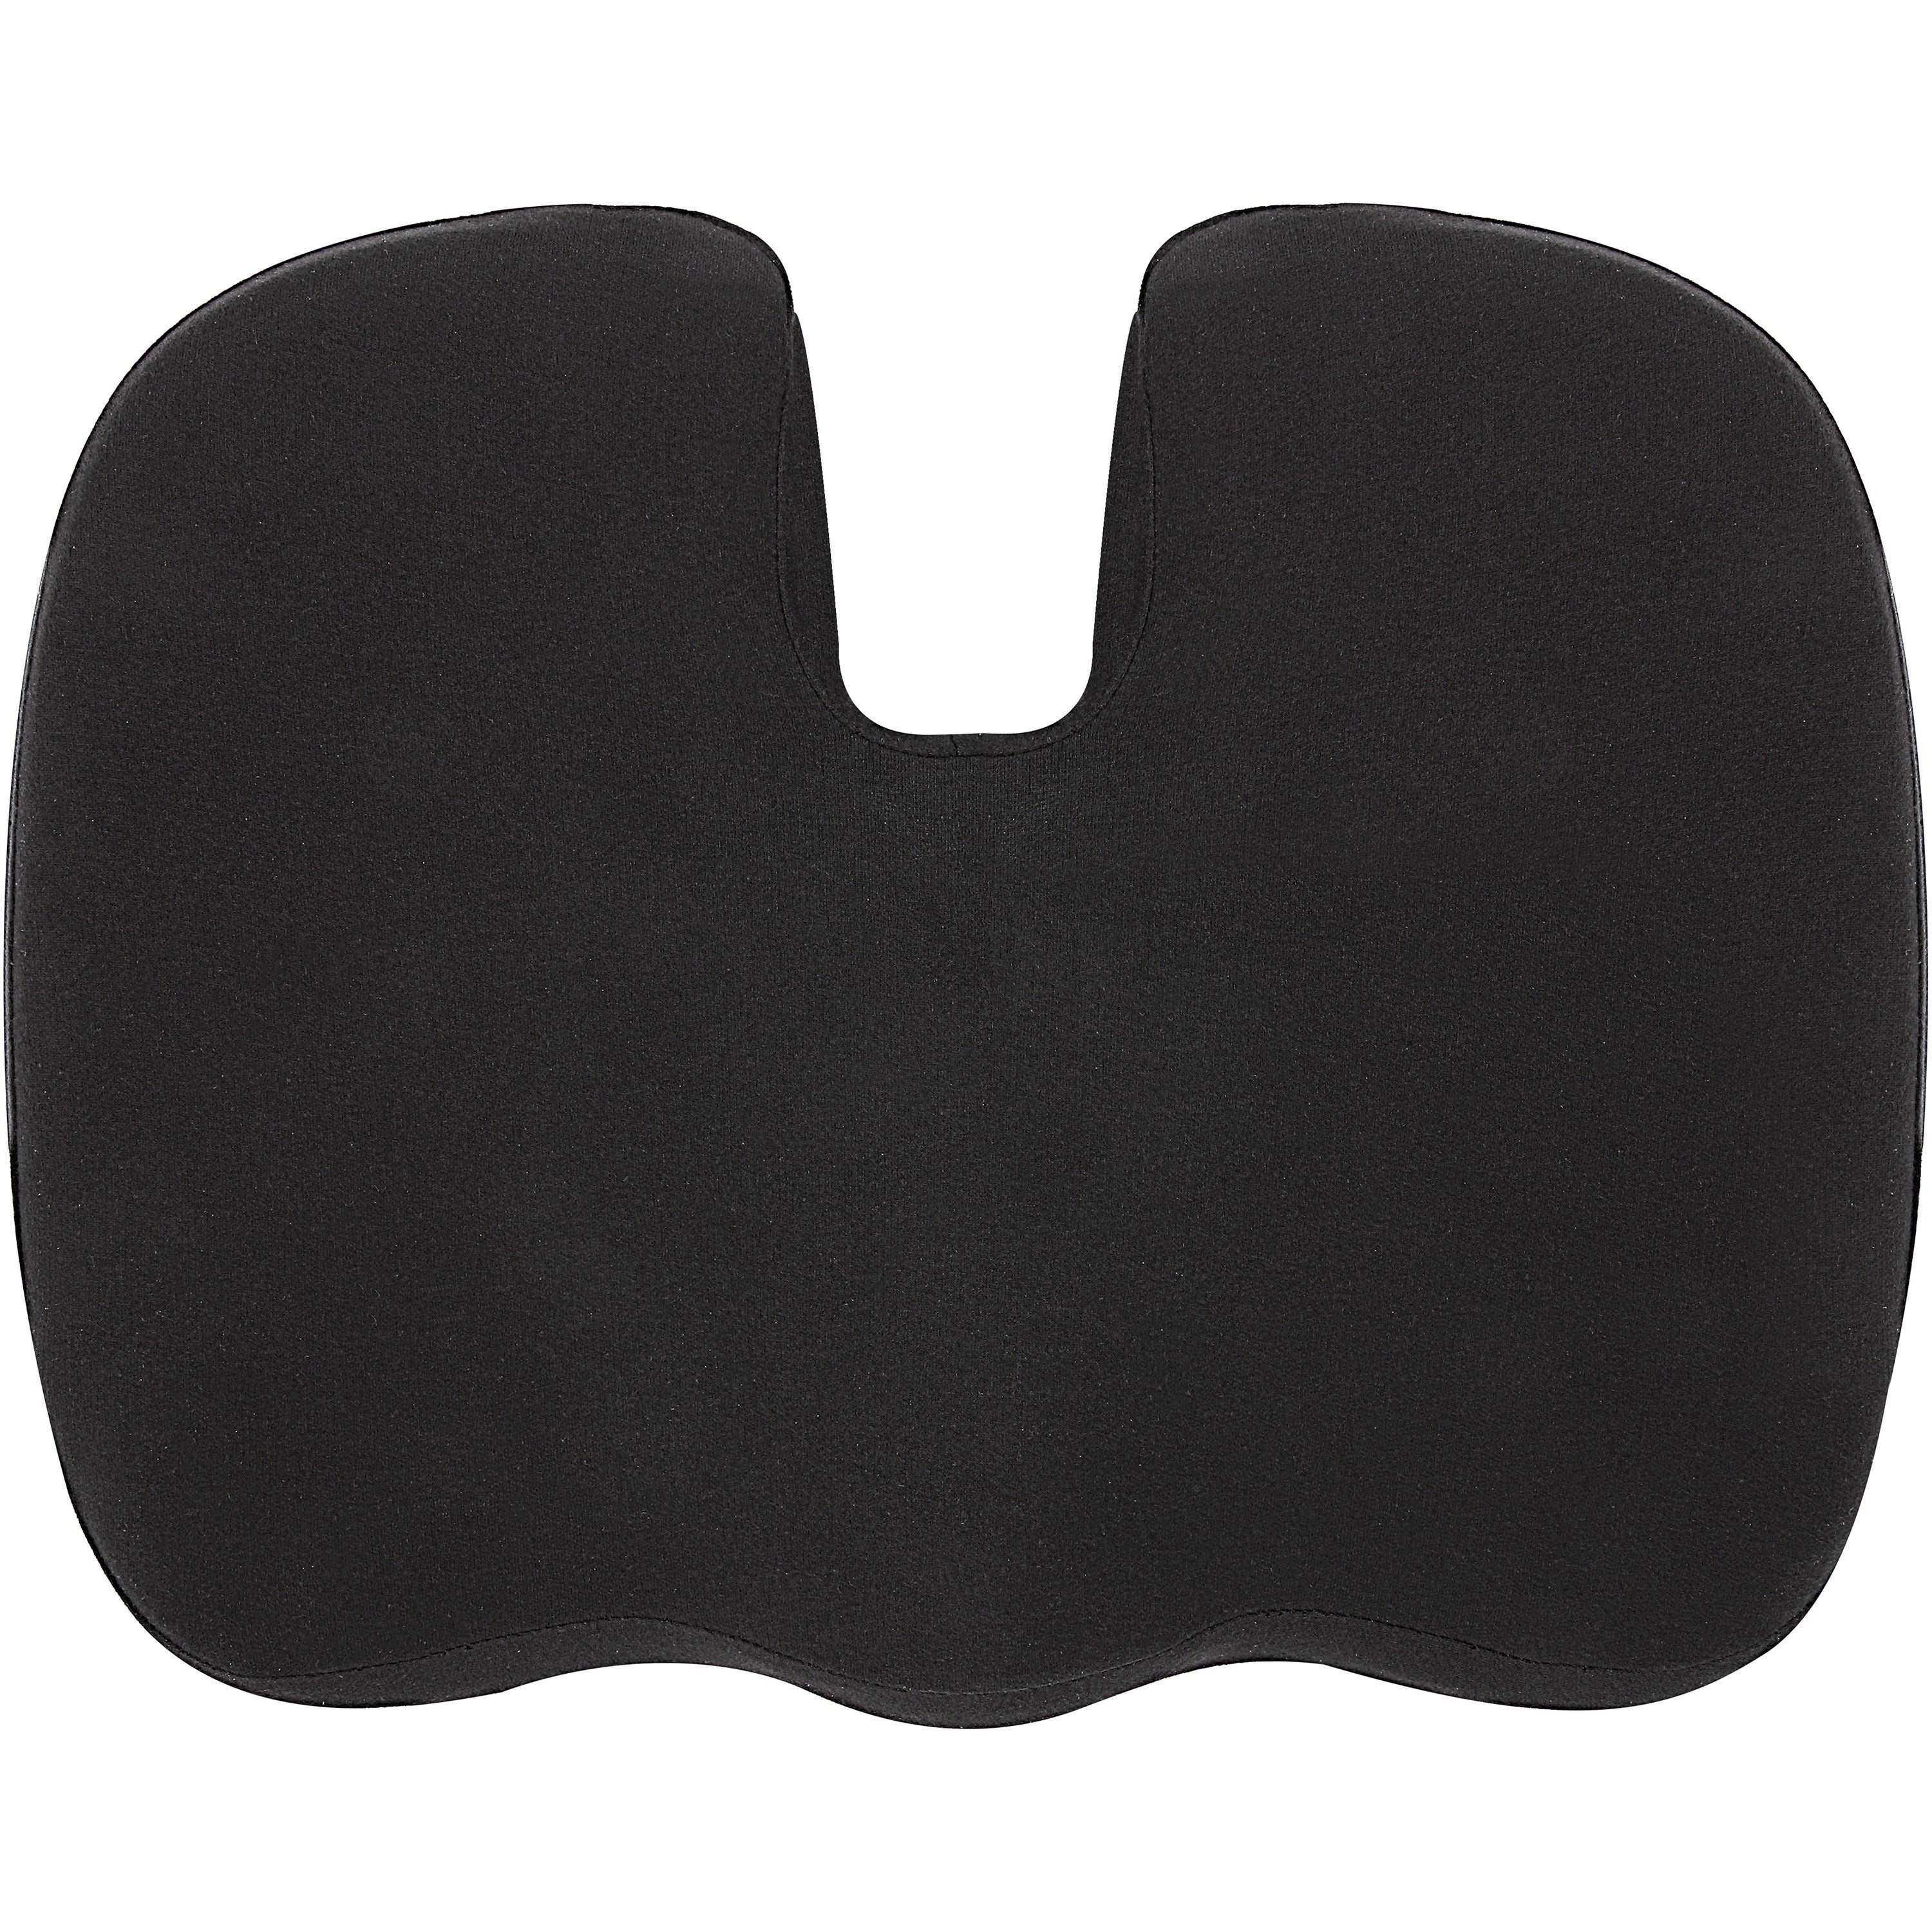 lorell-butterfly-shaped-seat-cushion-1750-x-1550-fabric-memory-foam-silicone-butterfly-comfortable-ergonomic-design-durable-machine-washable-zippered-anti-slip-black-1each_llr18307 - 4